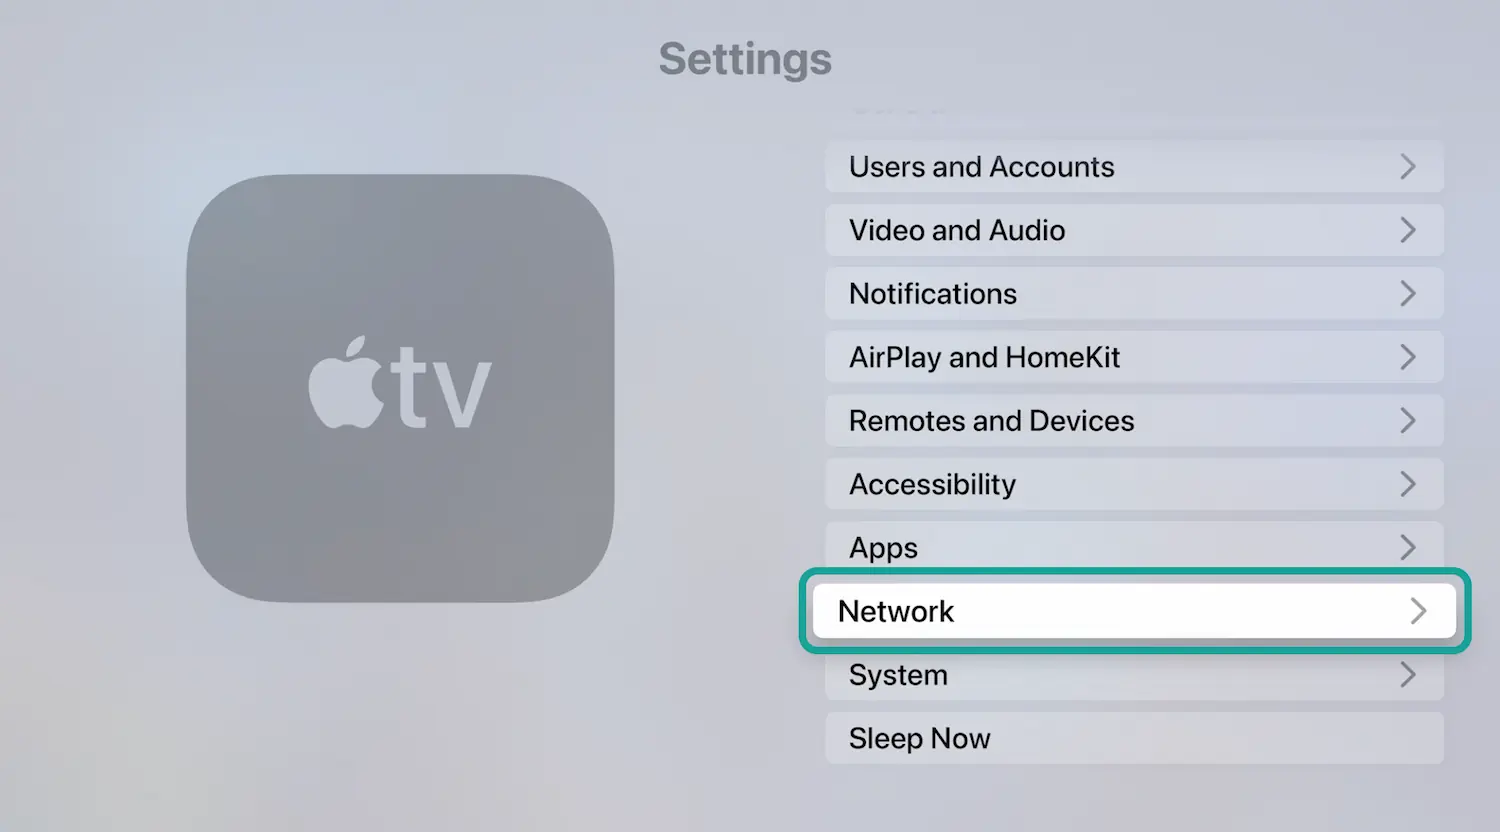 Selecting the 'Network' option in the Apple TV Settings menu